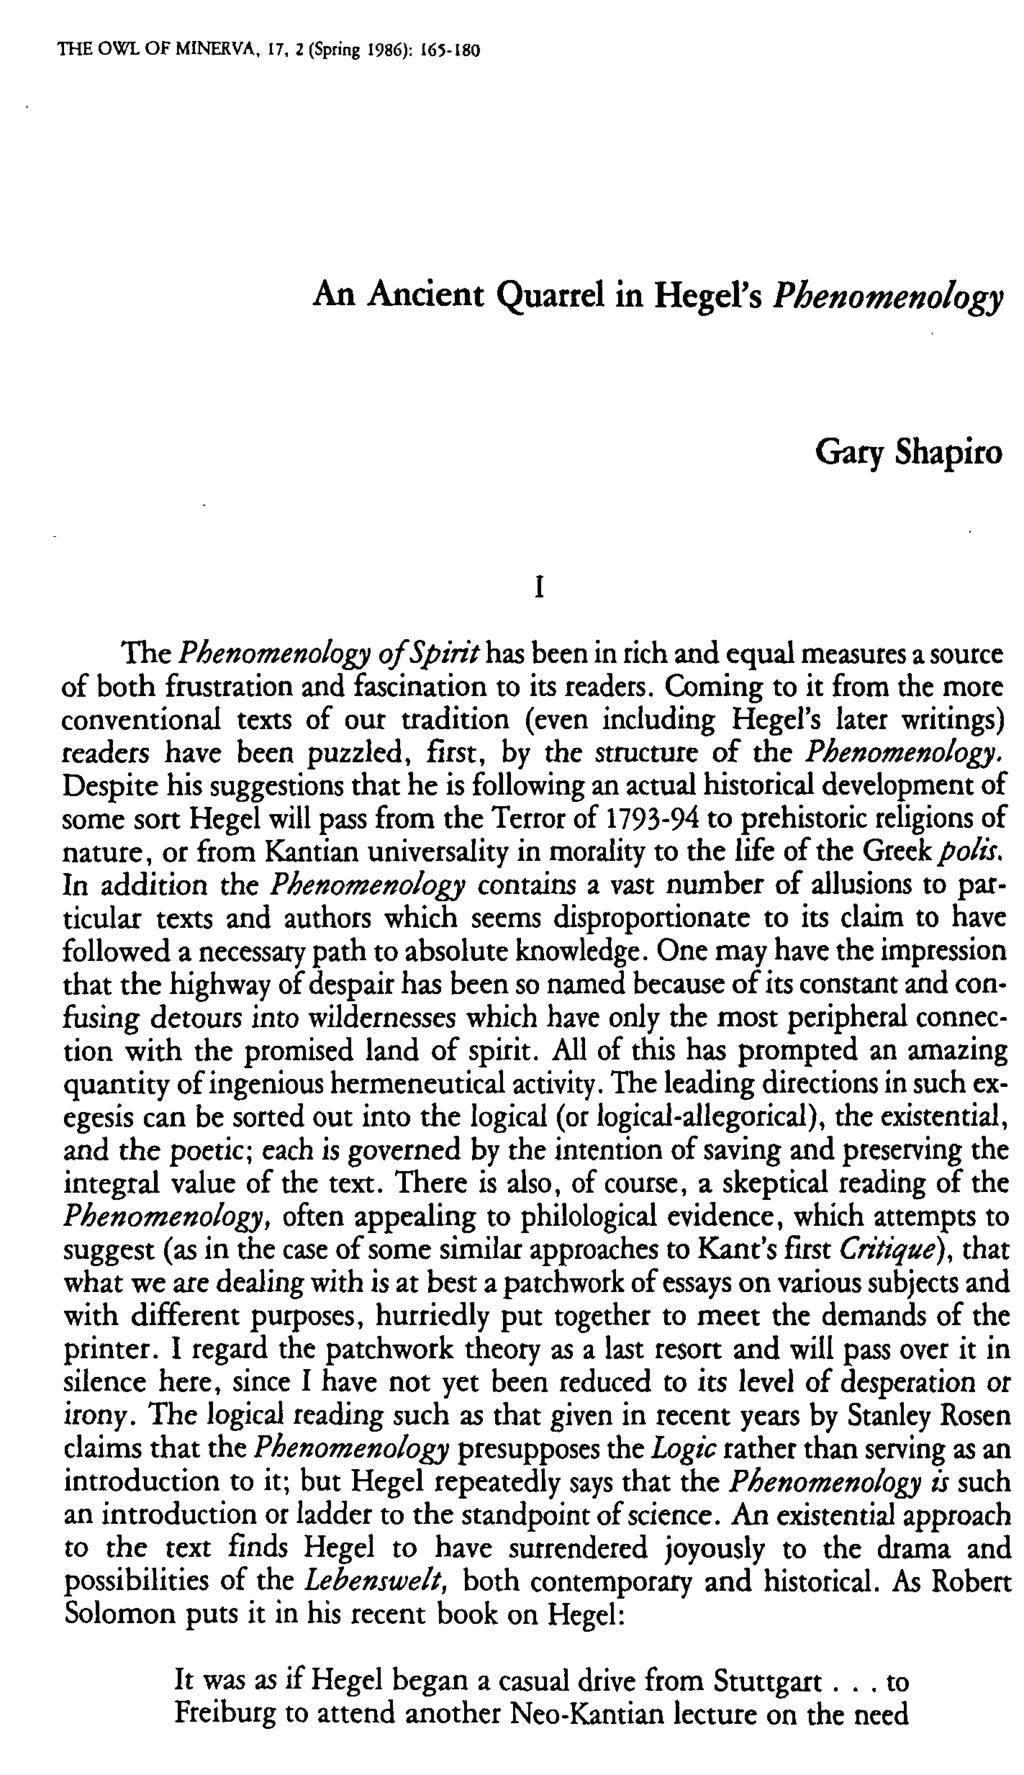 THE OWL OF MINERVA, 17, 2 (Spring 1986): 16~-180 An Ancient Quarrel in Hegel's Phenomenology Gary Shapiro The Phenomenology of Spin"t has been in rich and equal measures a source of both frustration